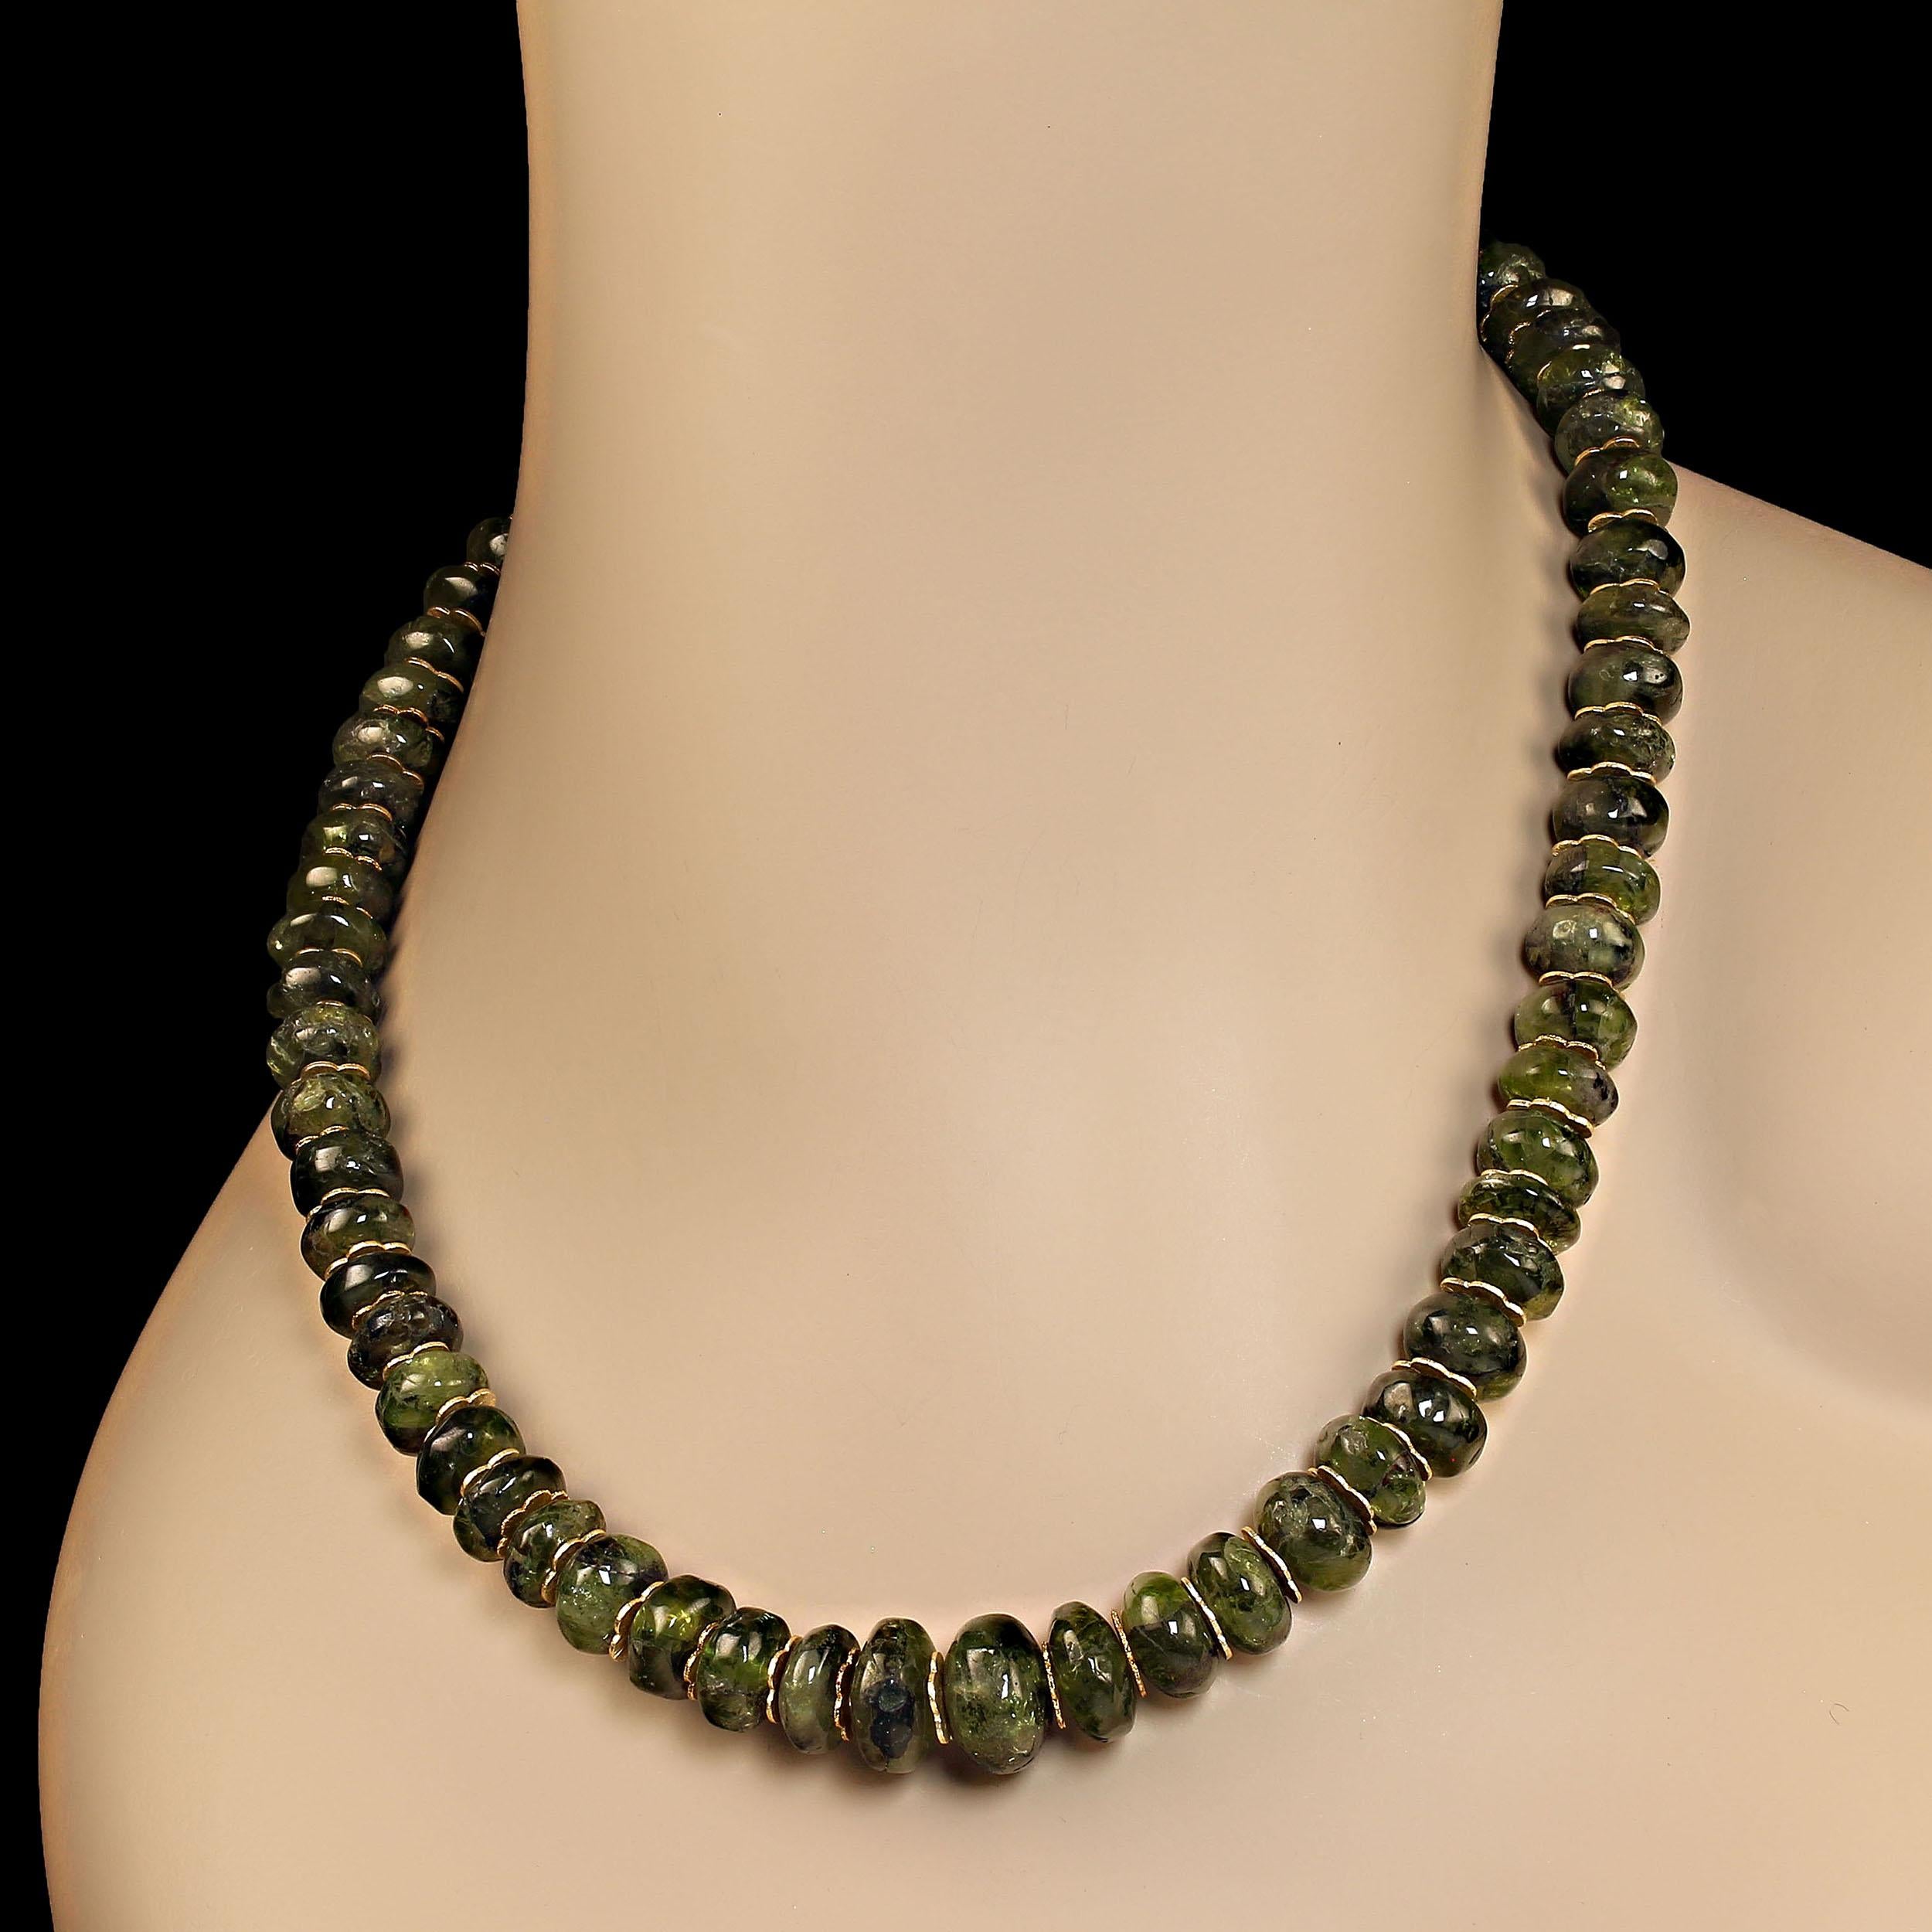 Artisan AJD Unique 19 In Graduated Green Garnet Necklace with goldy accents  Great Gift! For Sale